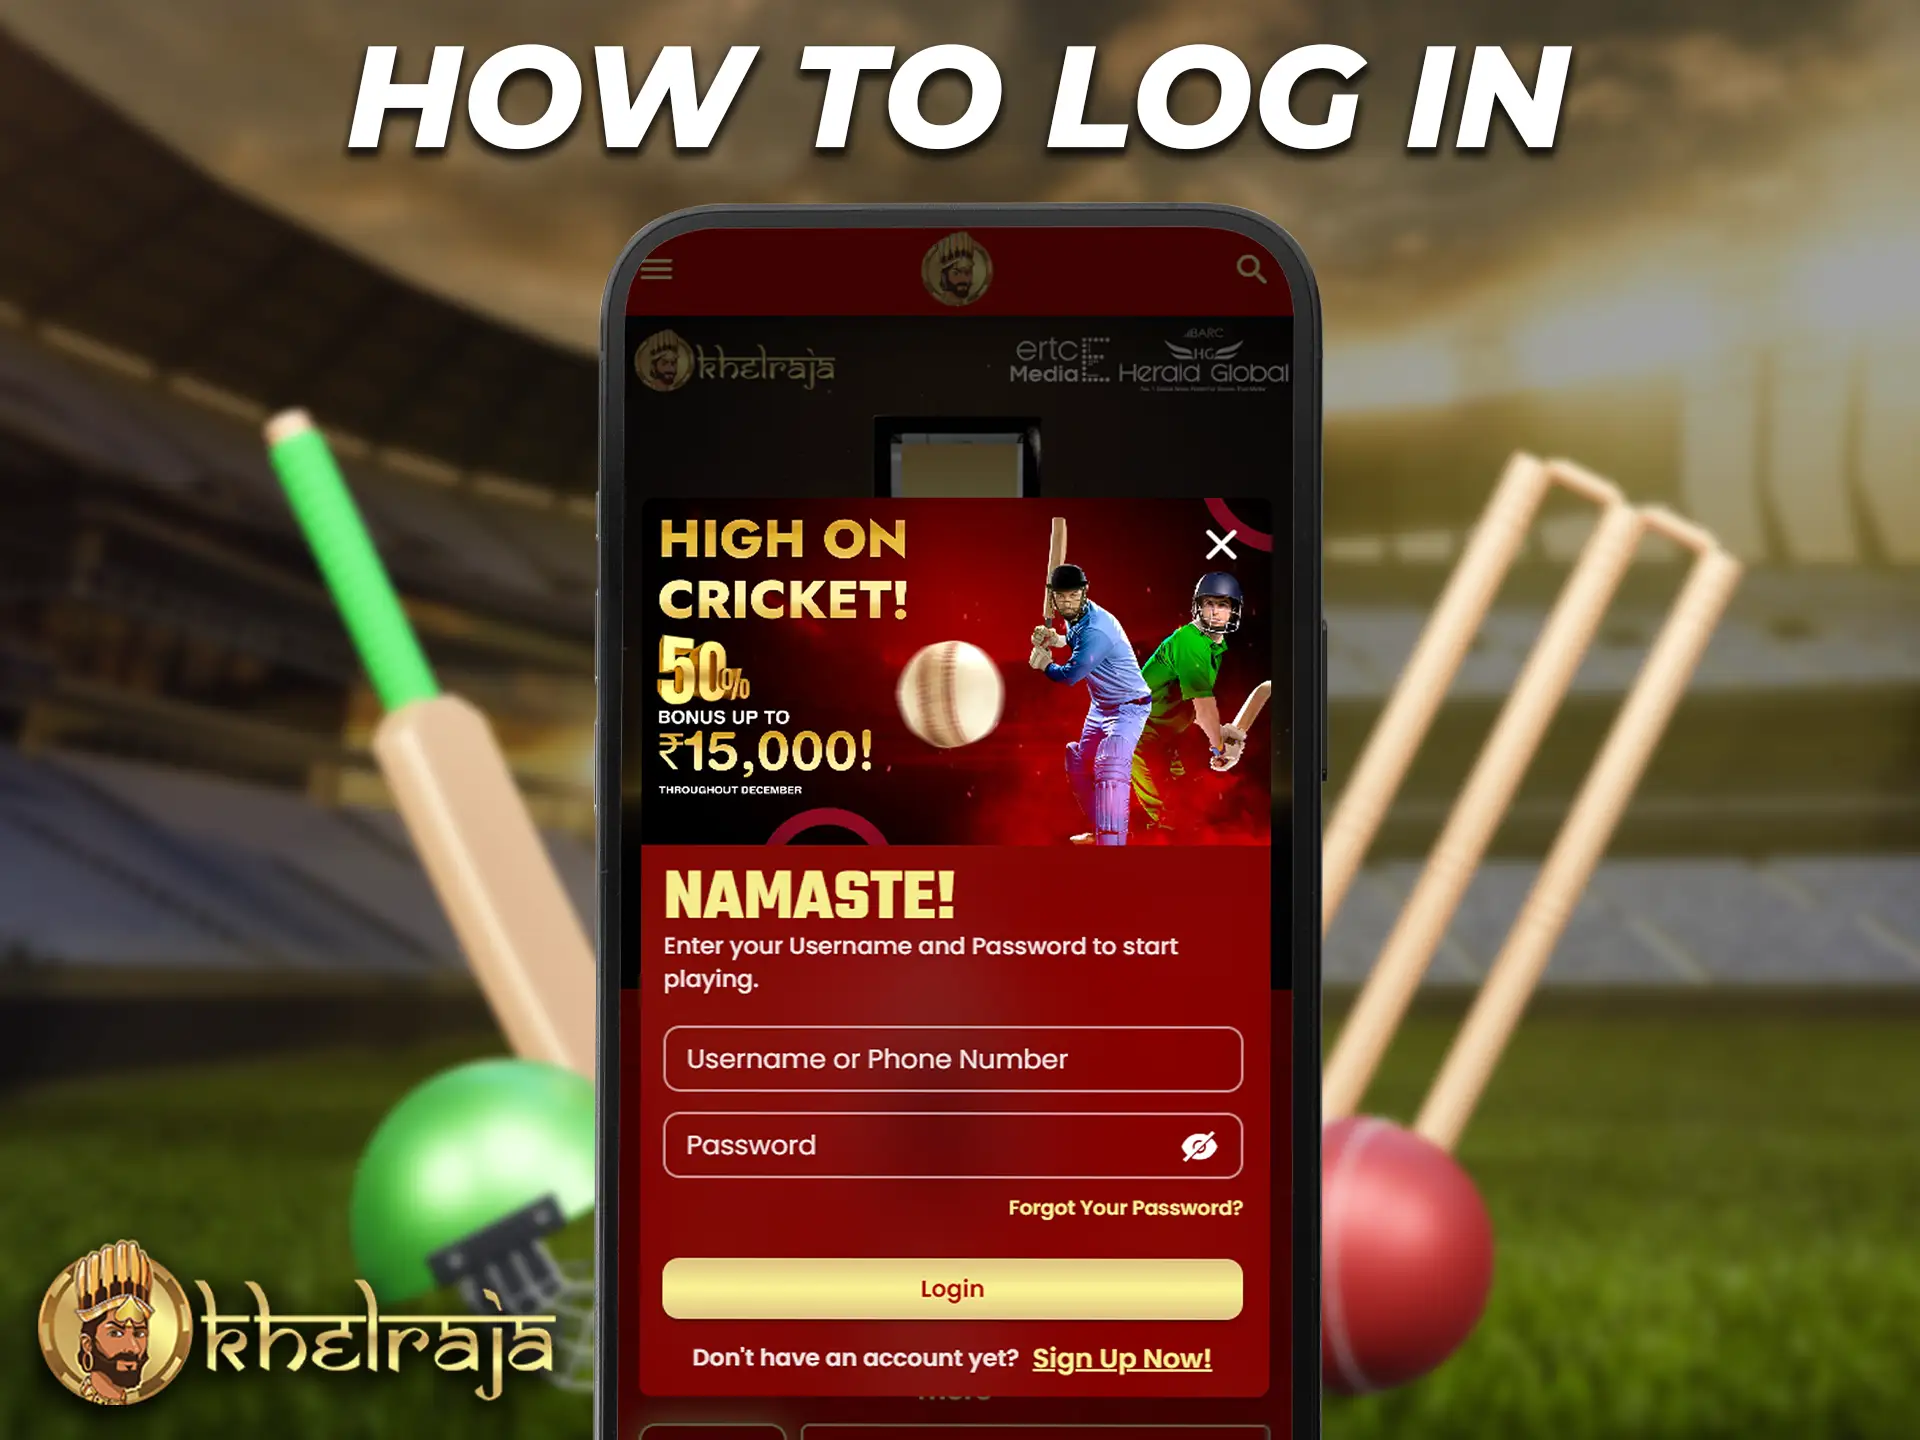 To log in to the app click on the Login button and enter your account username and password.